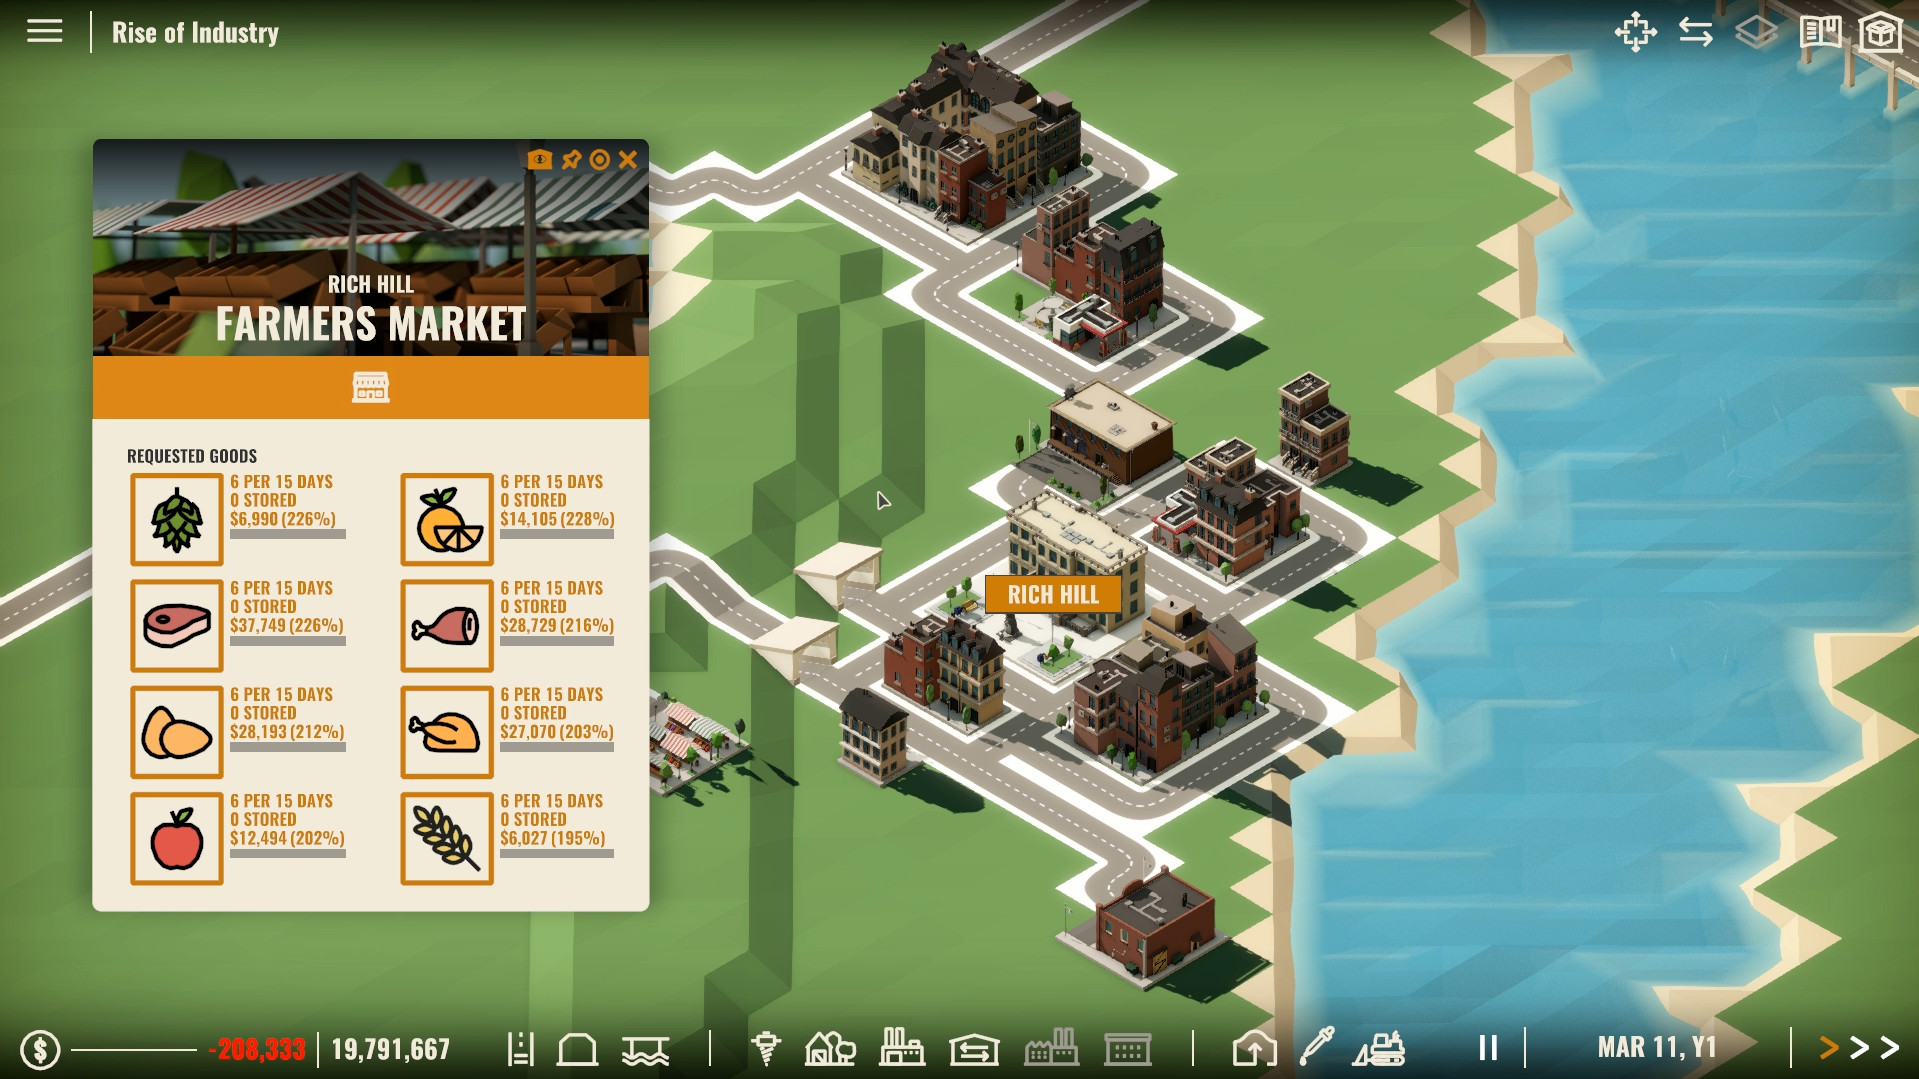 download rise of industry for free